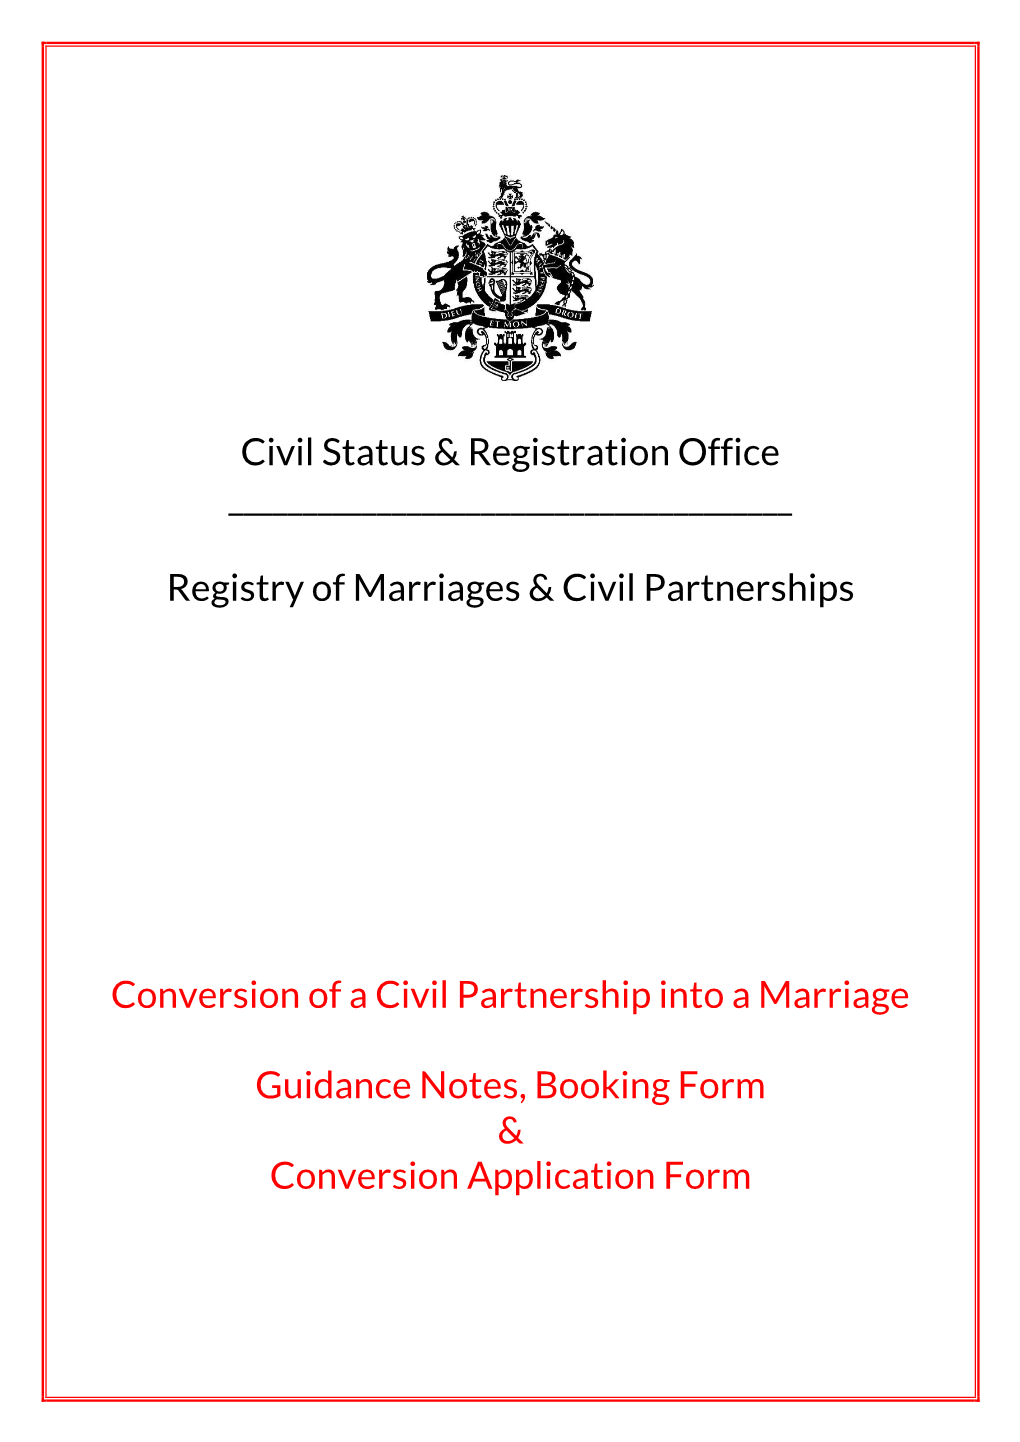 Registry of Marriages & Civil Partnerships